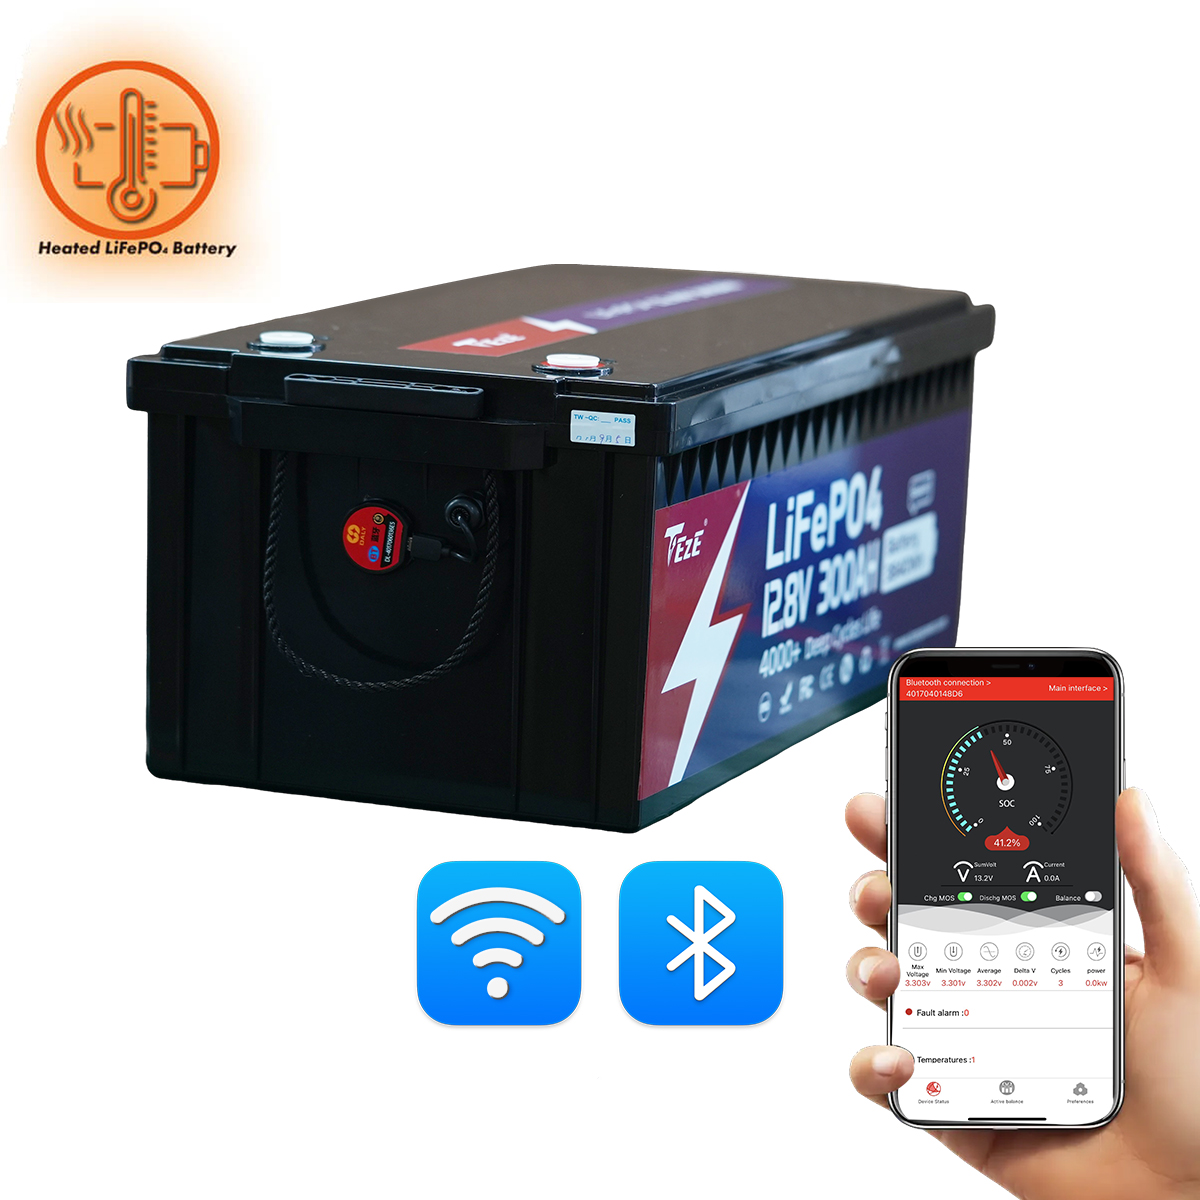 New Add WiFi-TezePower 12V 300Ah LiFePO4 Battery with WiFi and Bluetooth, Self-heating and Active Balancer, Built-in 200A Daly BMS(WiFi External Version)-TezePower